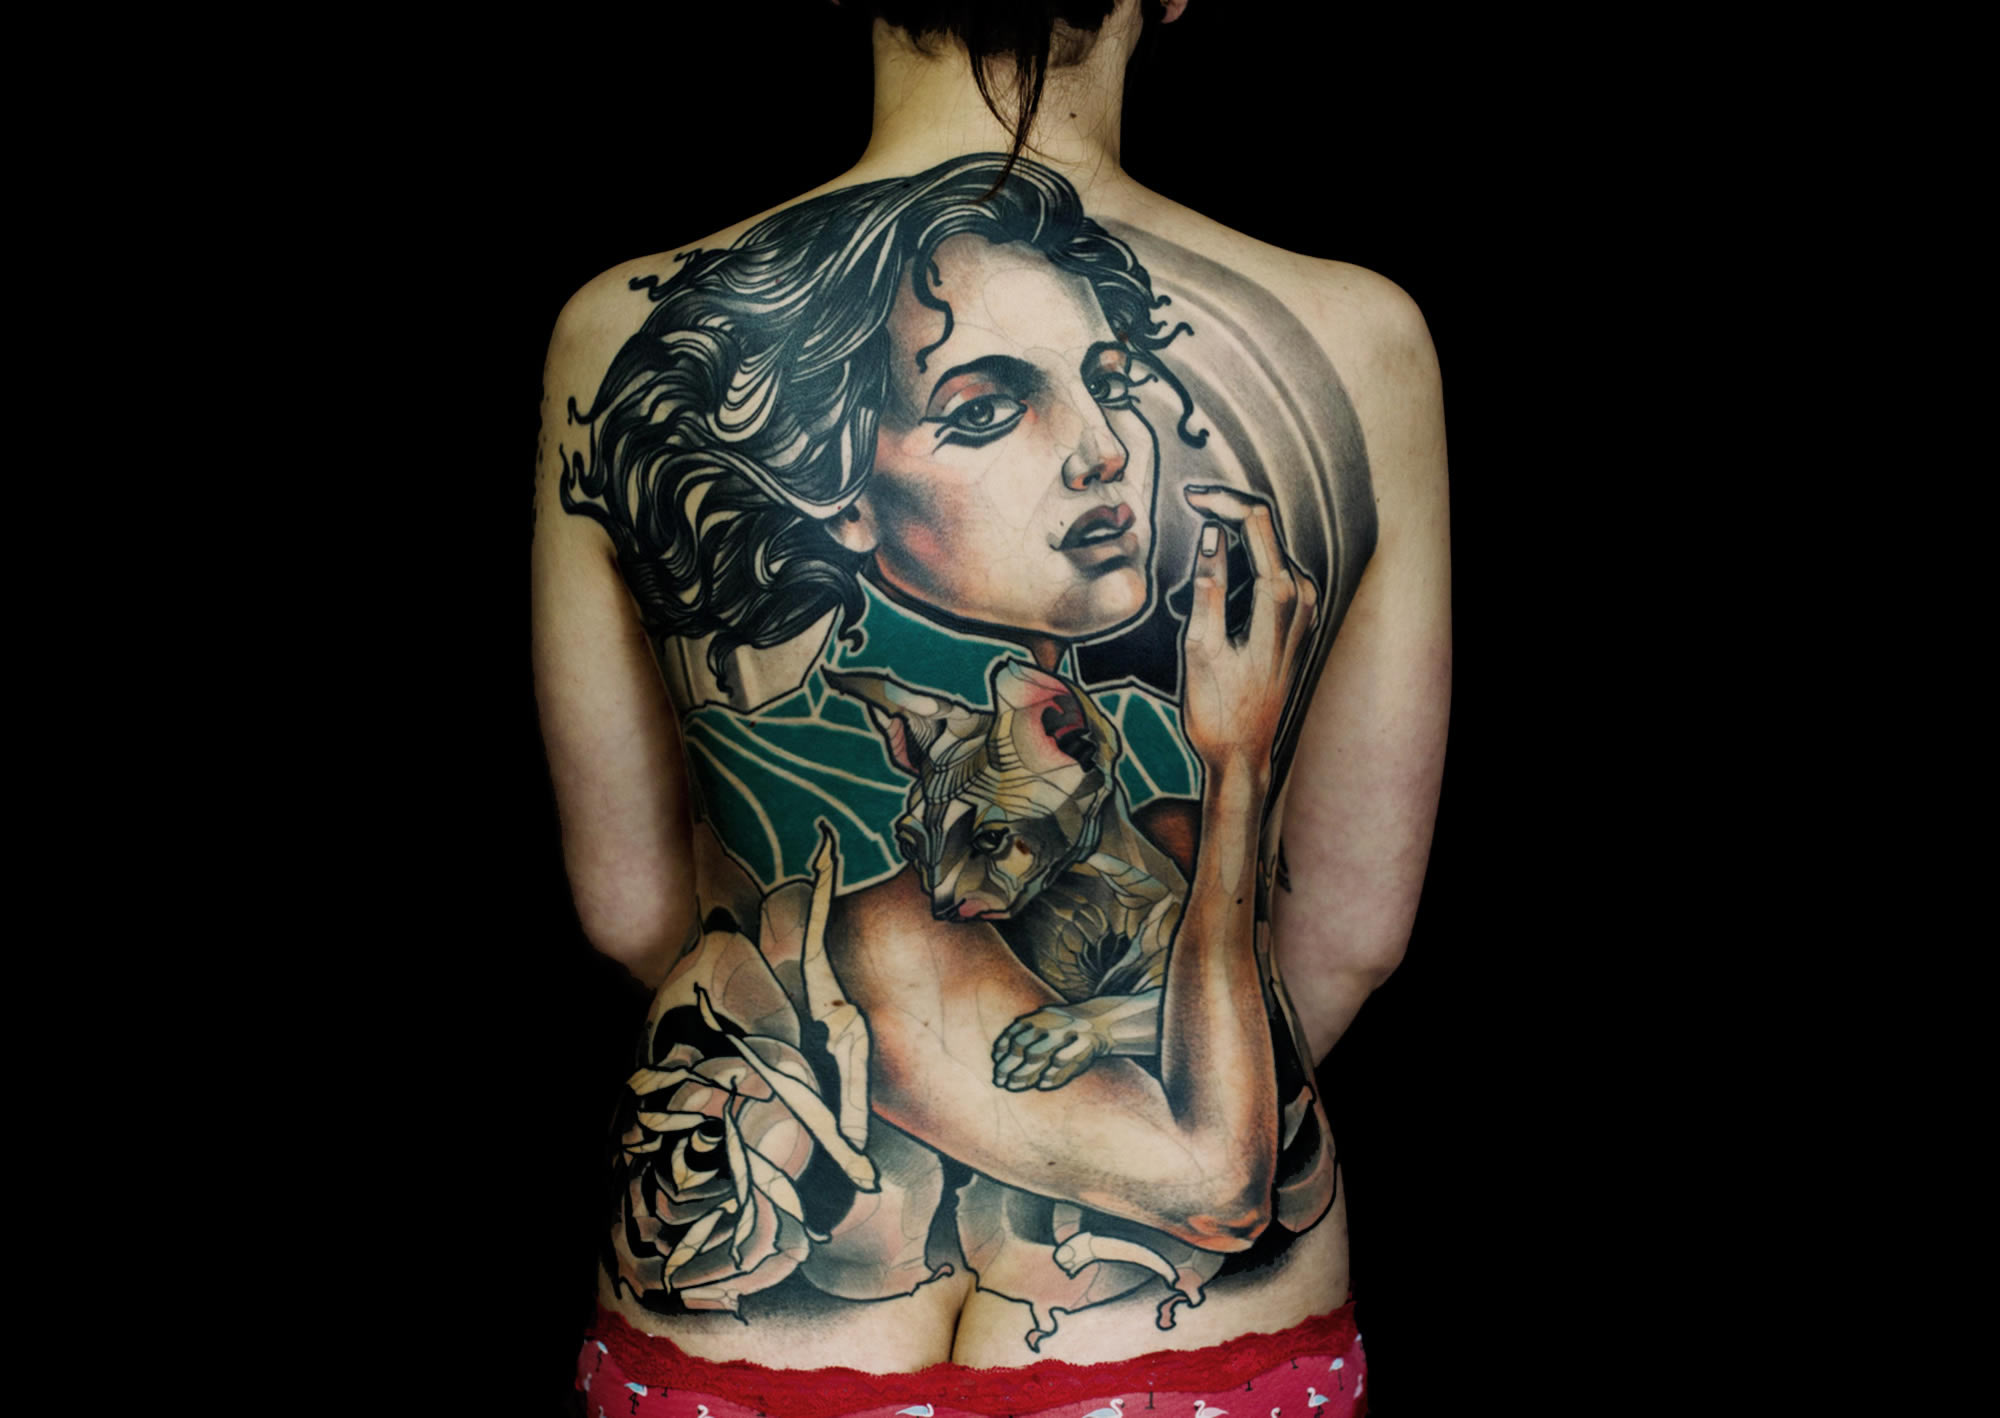 woman with cat, Full back tattoo by Renan Batista